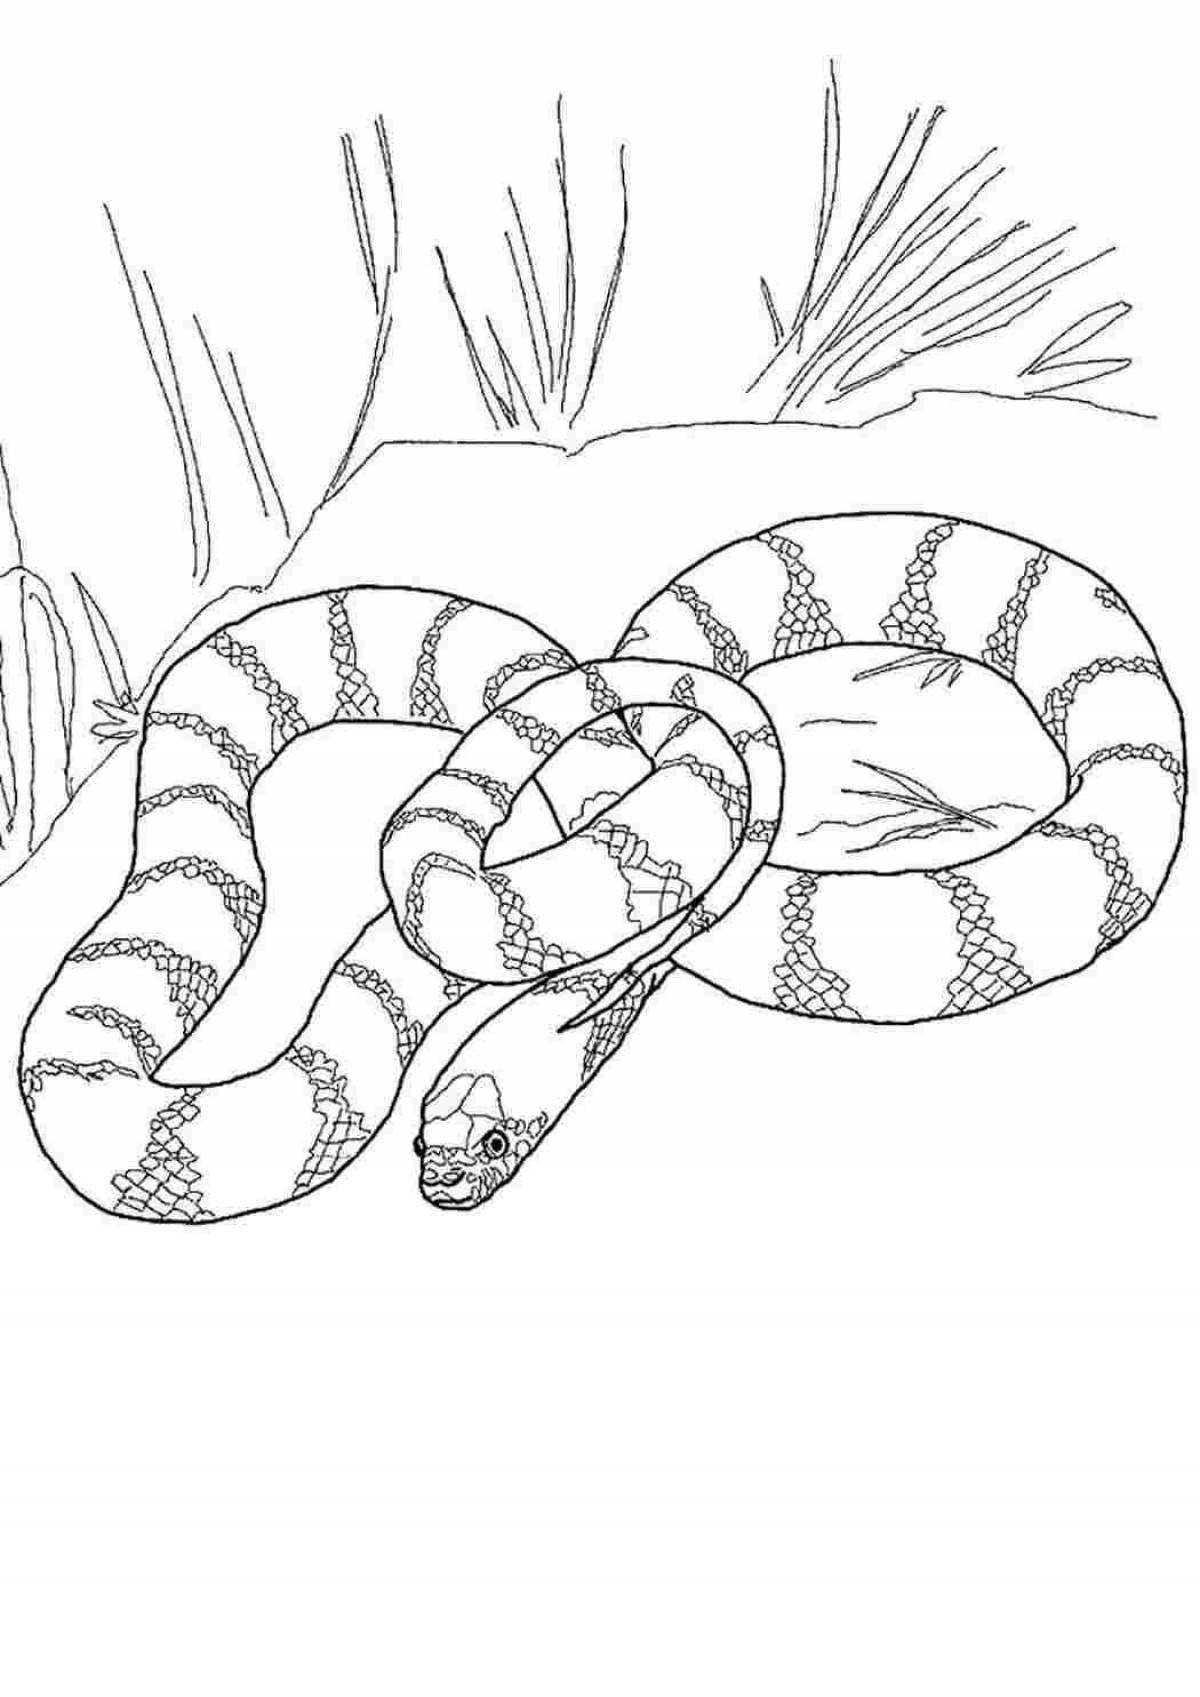 Majestic Budge blue snake coloring page